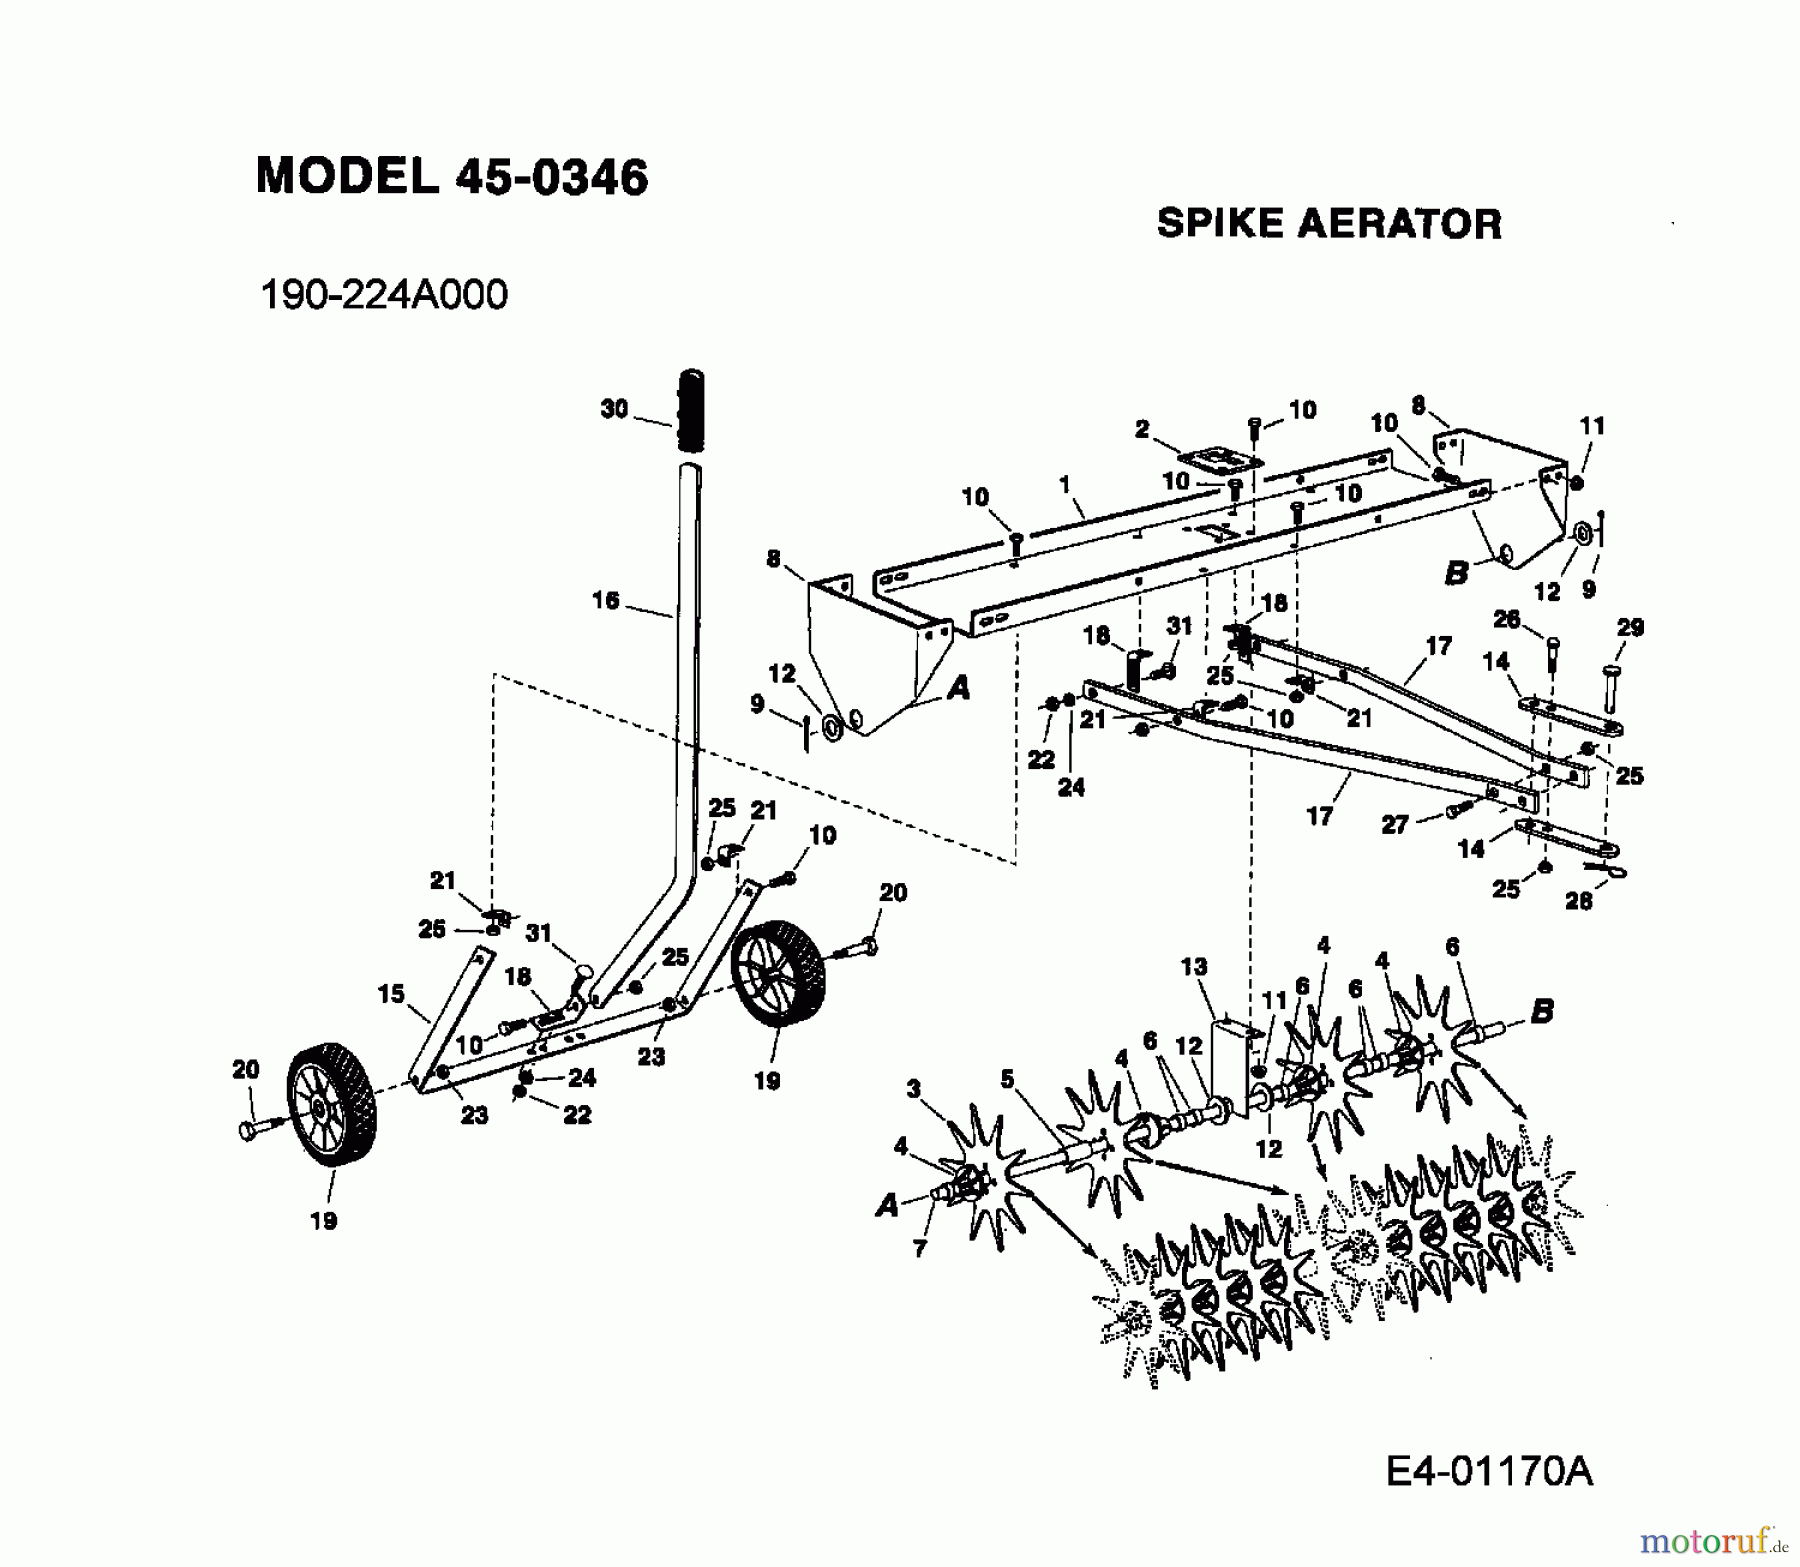  MTD Accessories Accessories garden and lawn tractors Groomer 45-0346  (190-224A000) 190-224A000  (2009) Basic machine